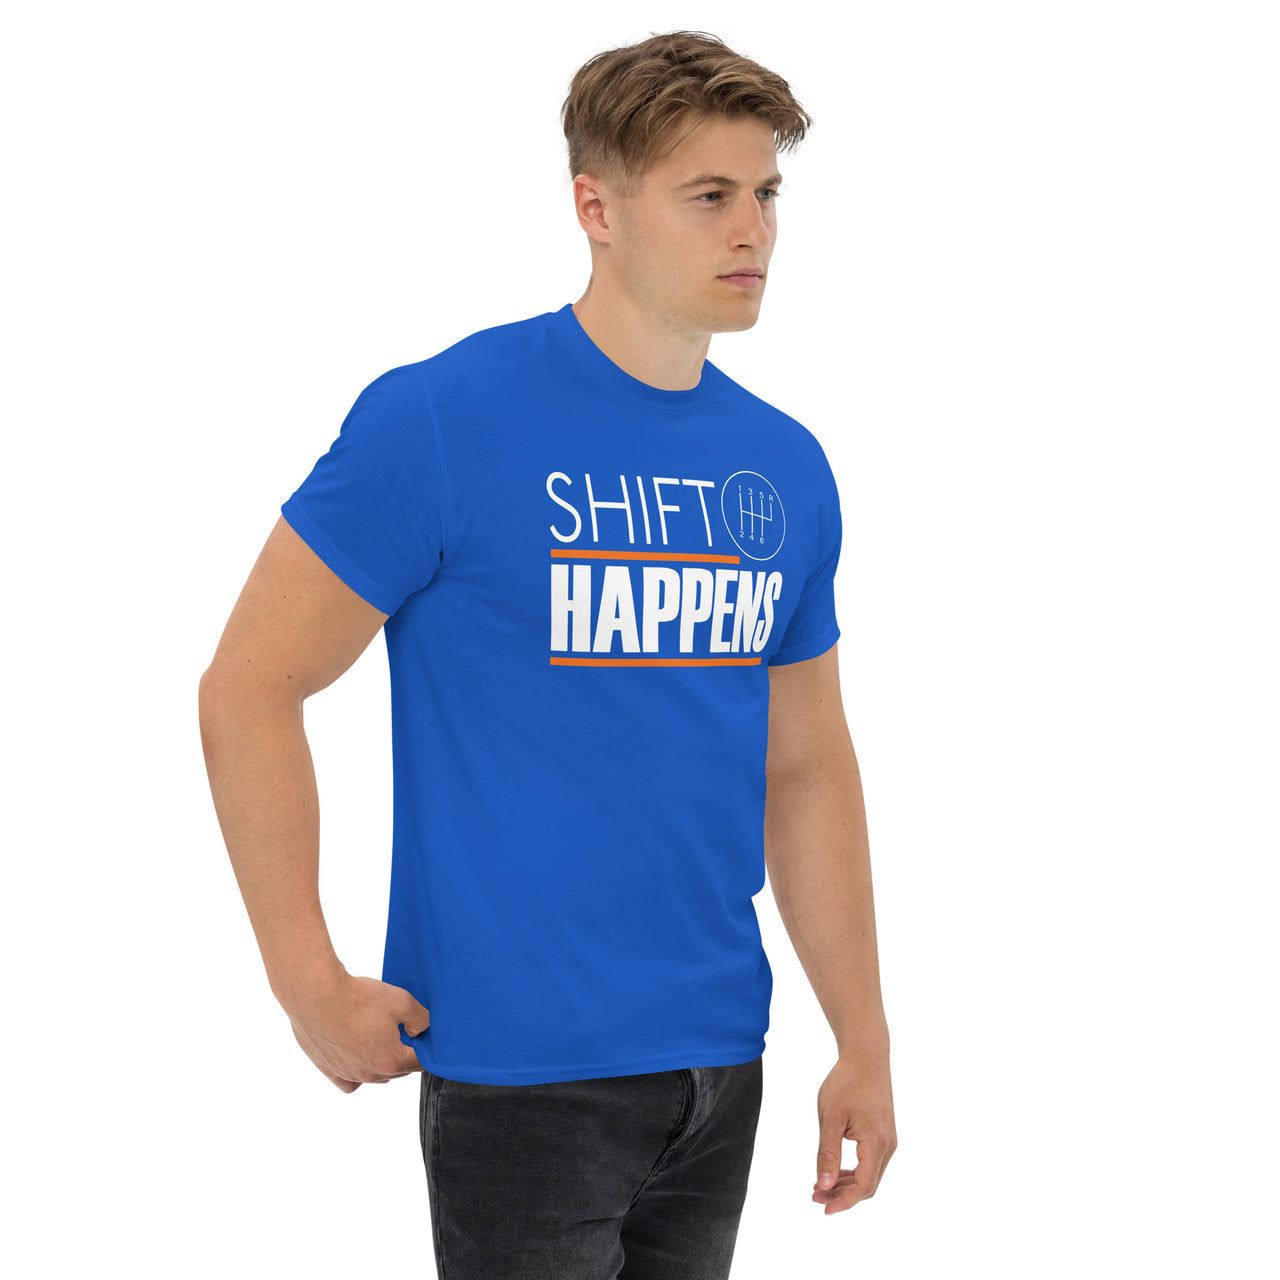 Car Enthusiast T-Shirt, Shift Happens Shirt, Manual Transmission Tee modeled in blue